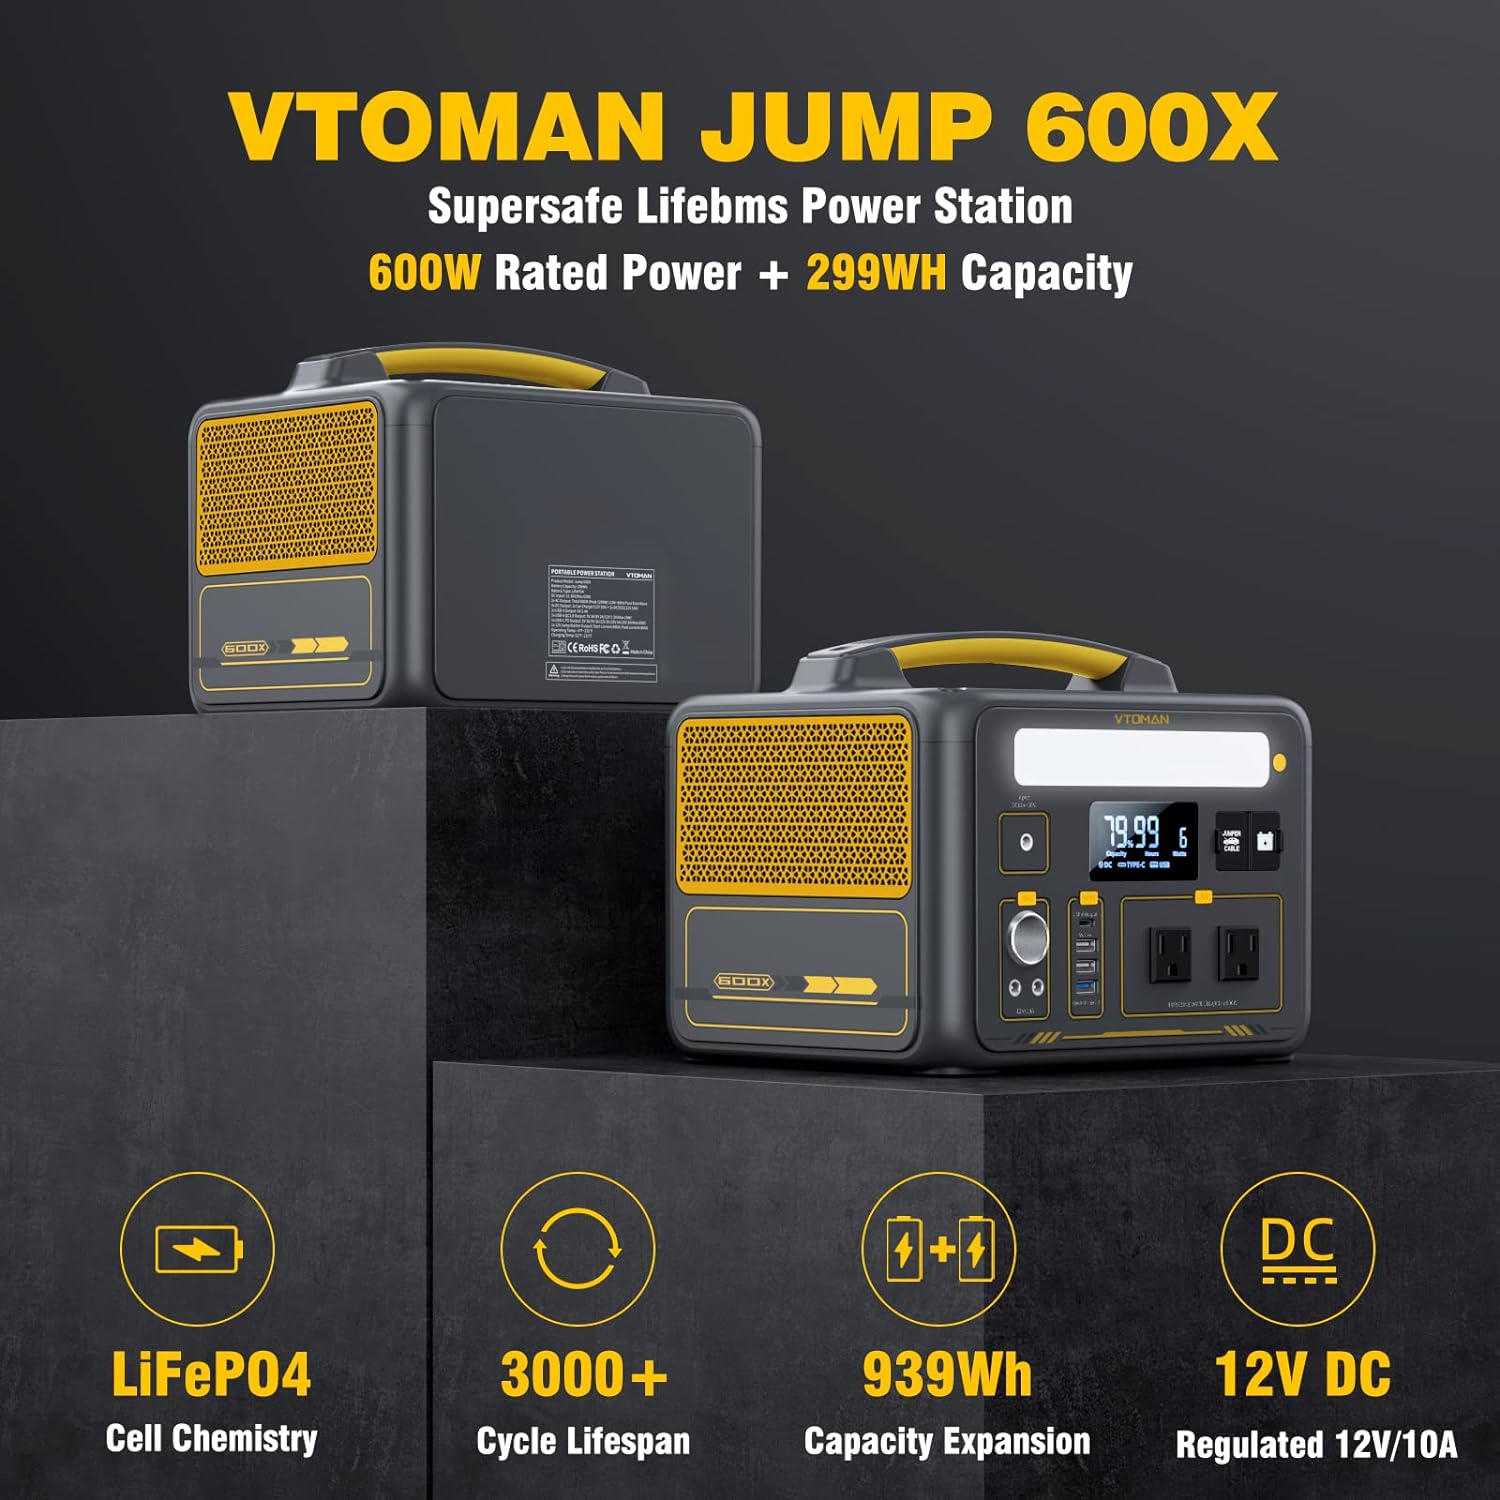 VTOMAN Jump 600X Portable Power Station 600W (1200W Peak), 299Wh LiFePO4 (LFP) Battery Powered Generator with 2x 110V/600W AC Outlets, 60W PD, Regulated 12V DC Output for RV/Van Camping  Home Backup - VTOMAN Jump 600X Portable Power Station Review